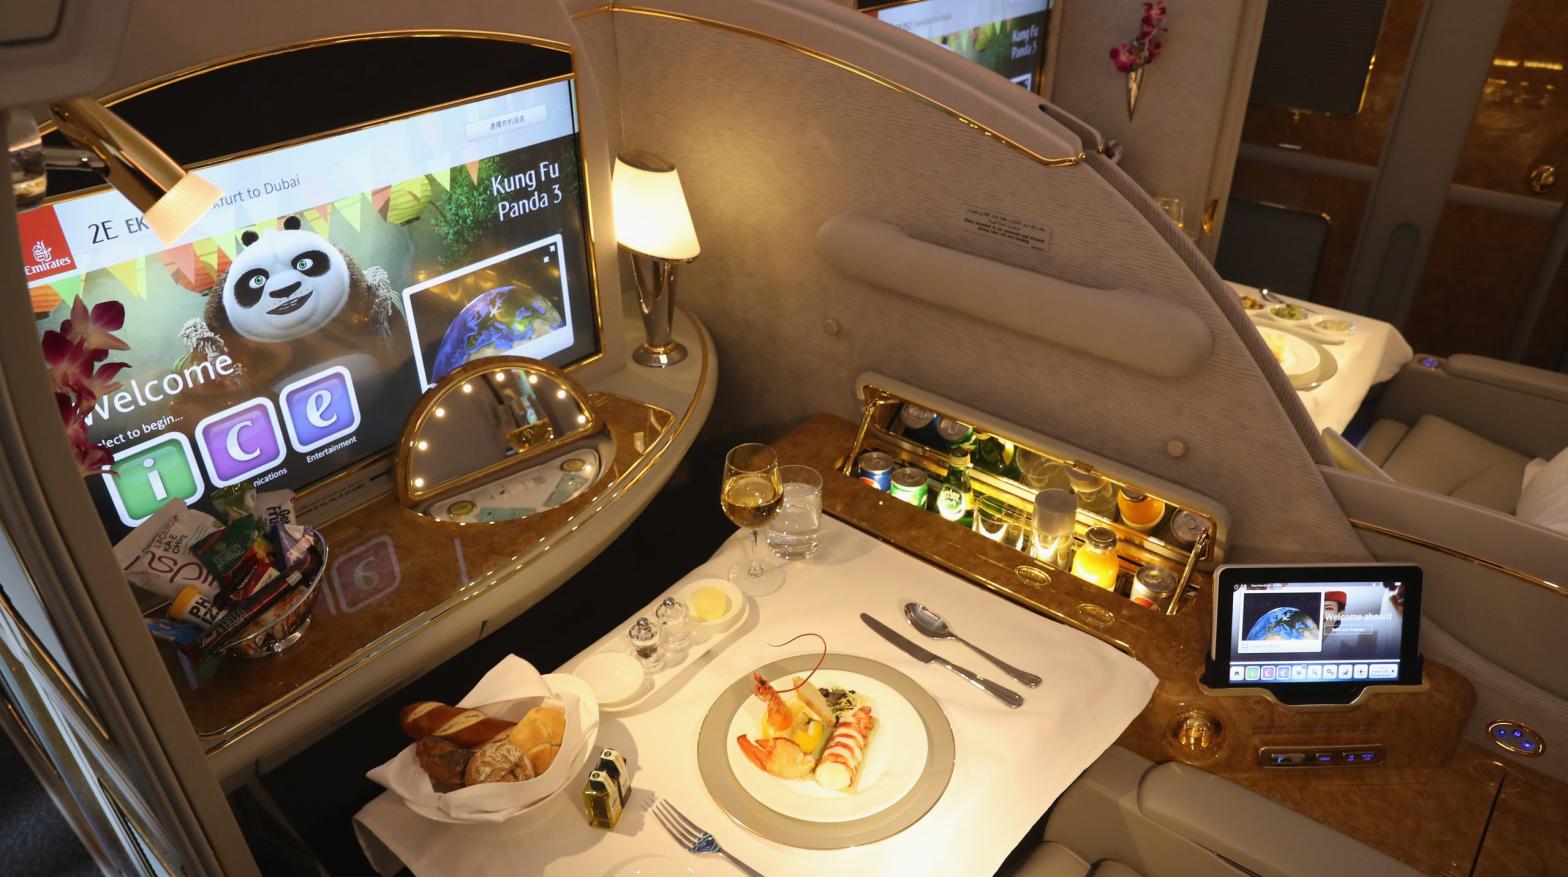 A meal lies served in a compartment in first class on board an Emirates A380 passenger plane. (Photo: Sean Gallup, Getty Images)